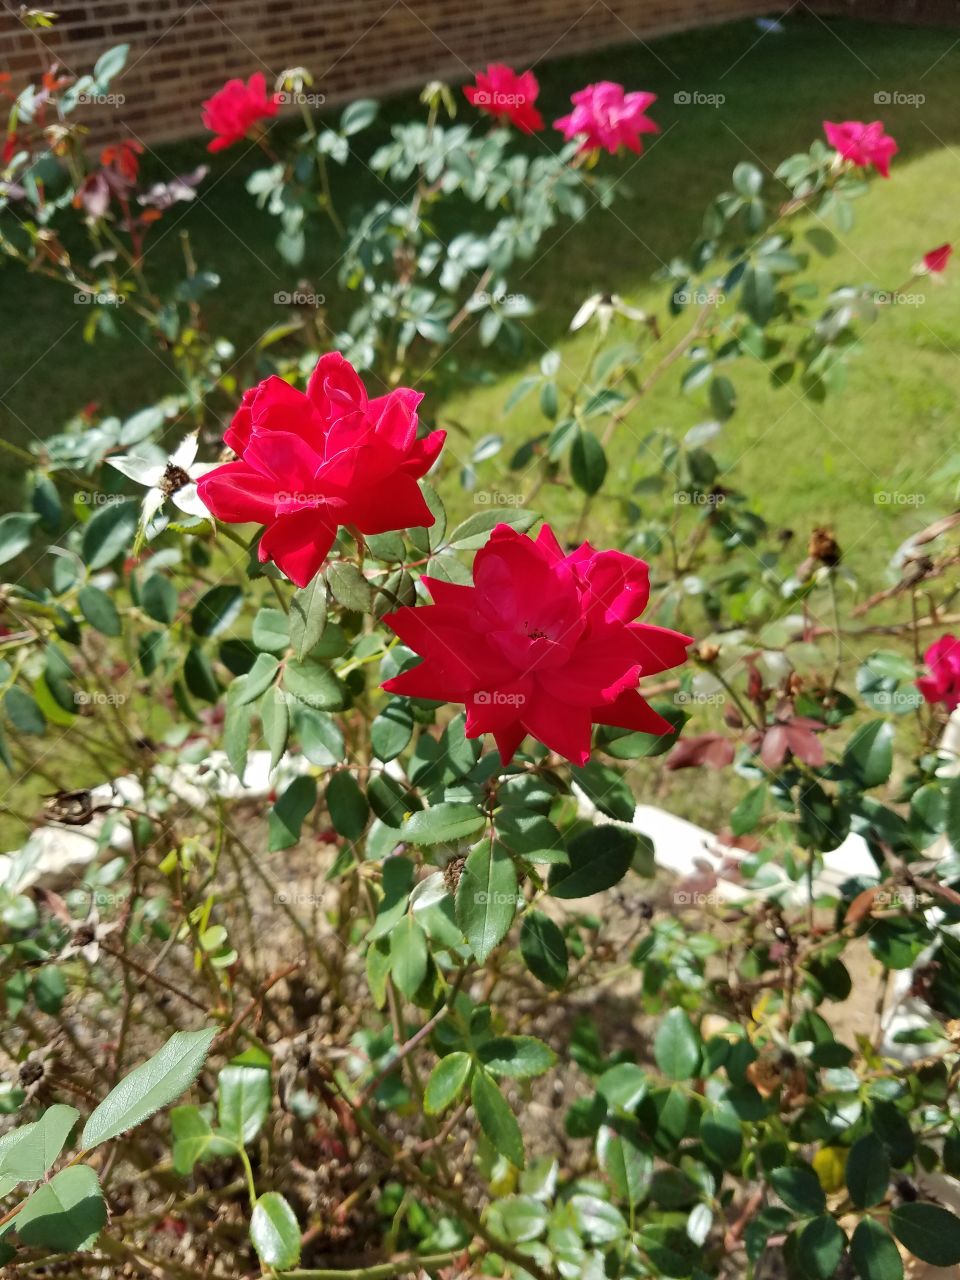 Elevated view of red roses